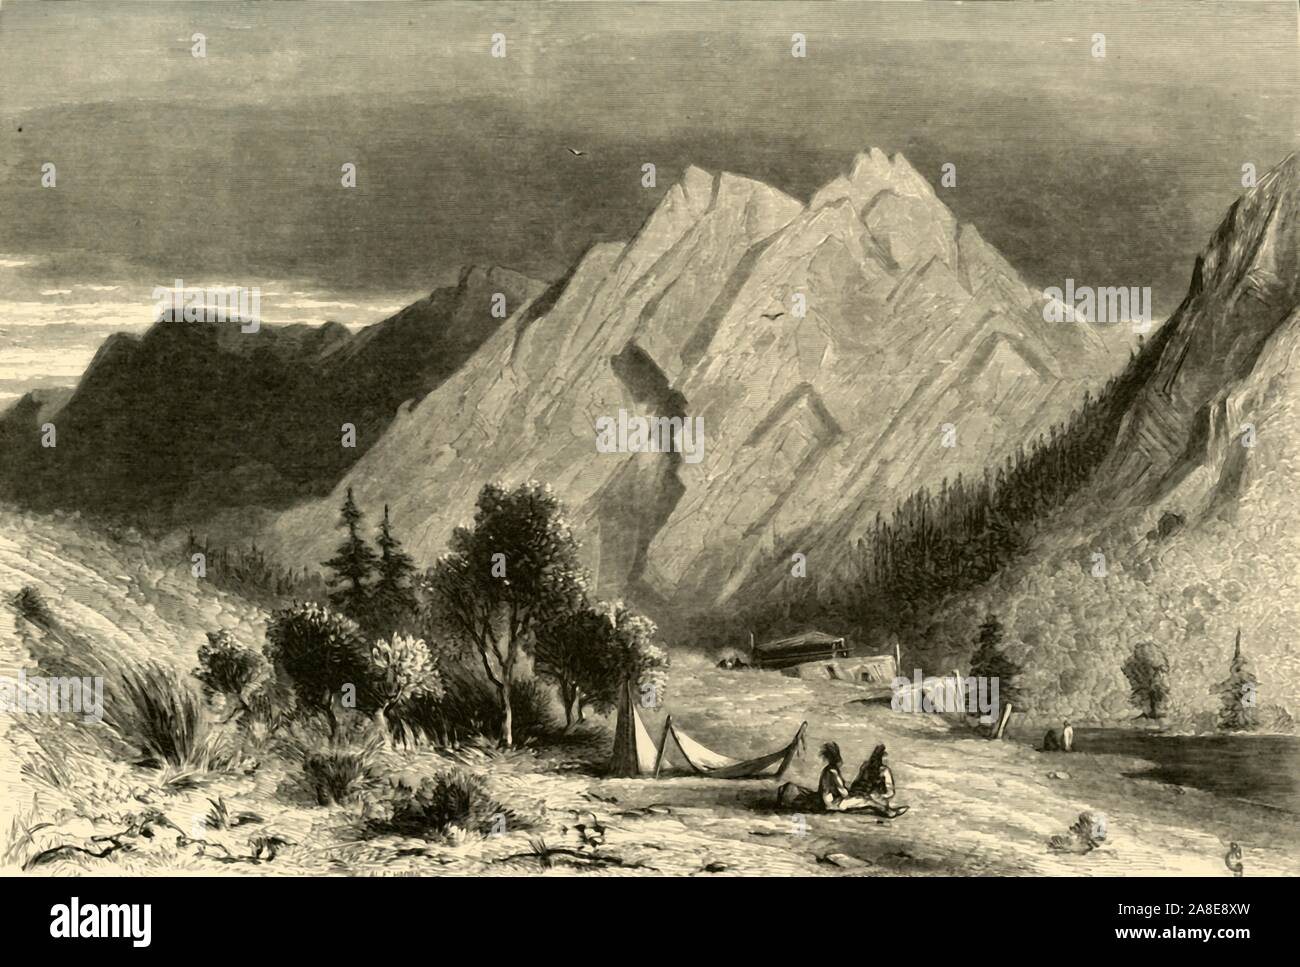 'Limestone Formation, on Pitt River', 1872. Geological feature near the Pit River in Northern California, USA. 'Here the Indians, known by the name of the river, are mostly to be found, encamped in great numbers on the plain...The river is quite rapid, but neither broad nor deep. It abounds in salmon...This accounts for the presence of the Indians, who secure the fish by spearing'. From &quot;Picturesque America; or, The Land We Live In, A Delineation by Pen and Pencil of the Mountains, Rivers, Lakes...with Illustrations on Steel and Wood by Eminent American Artists&quot; Vol. I, edited by Wil Stock Photo